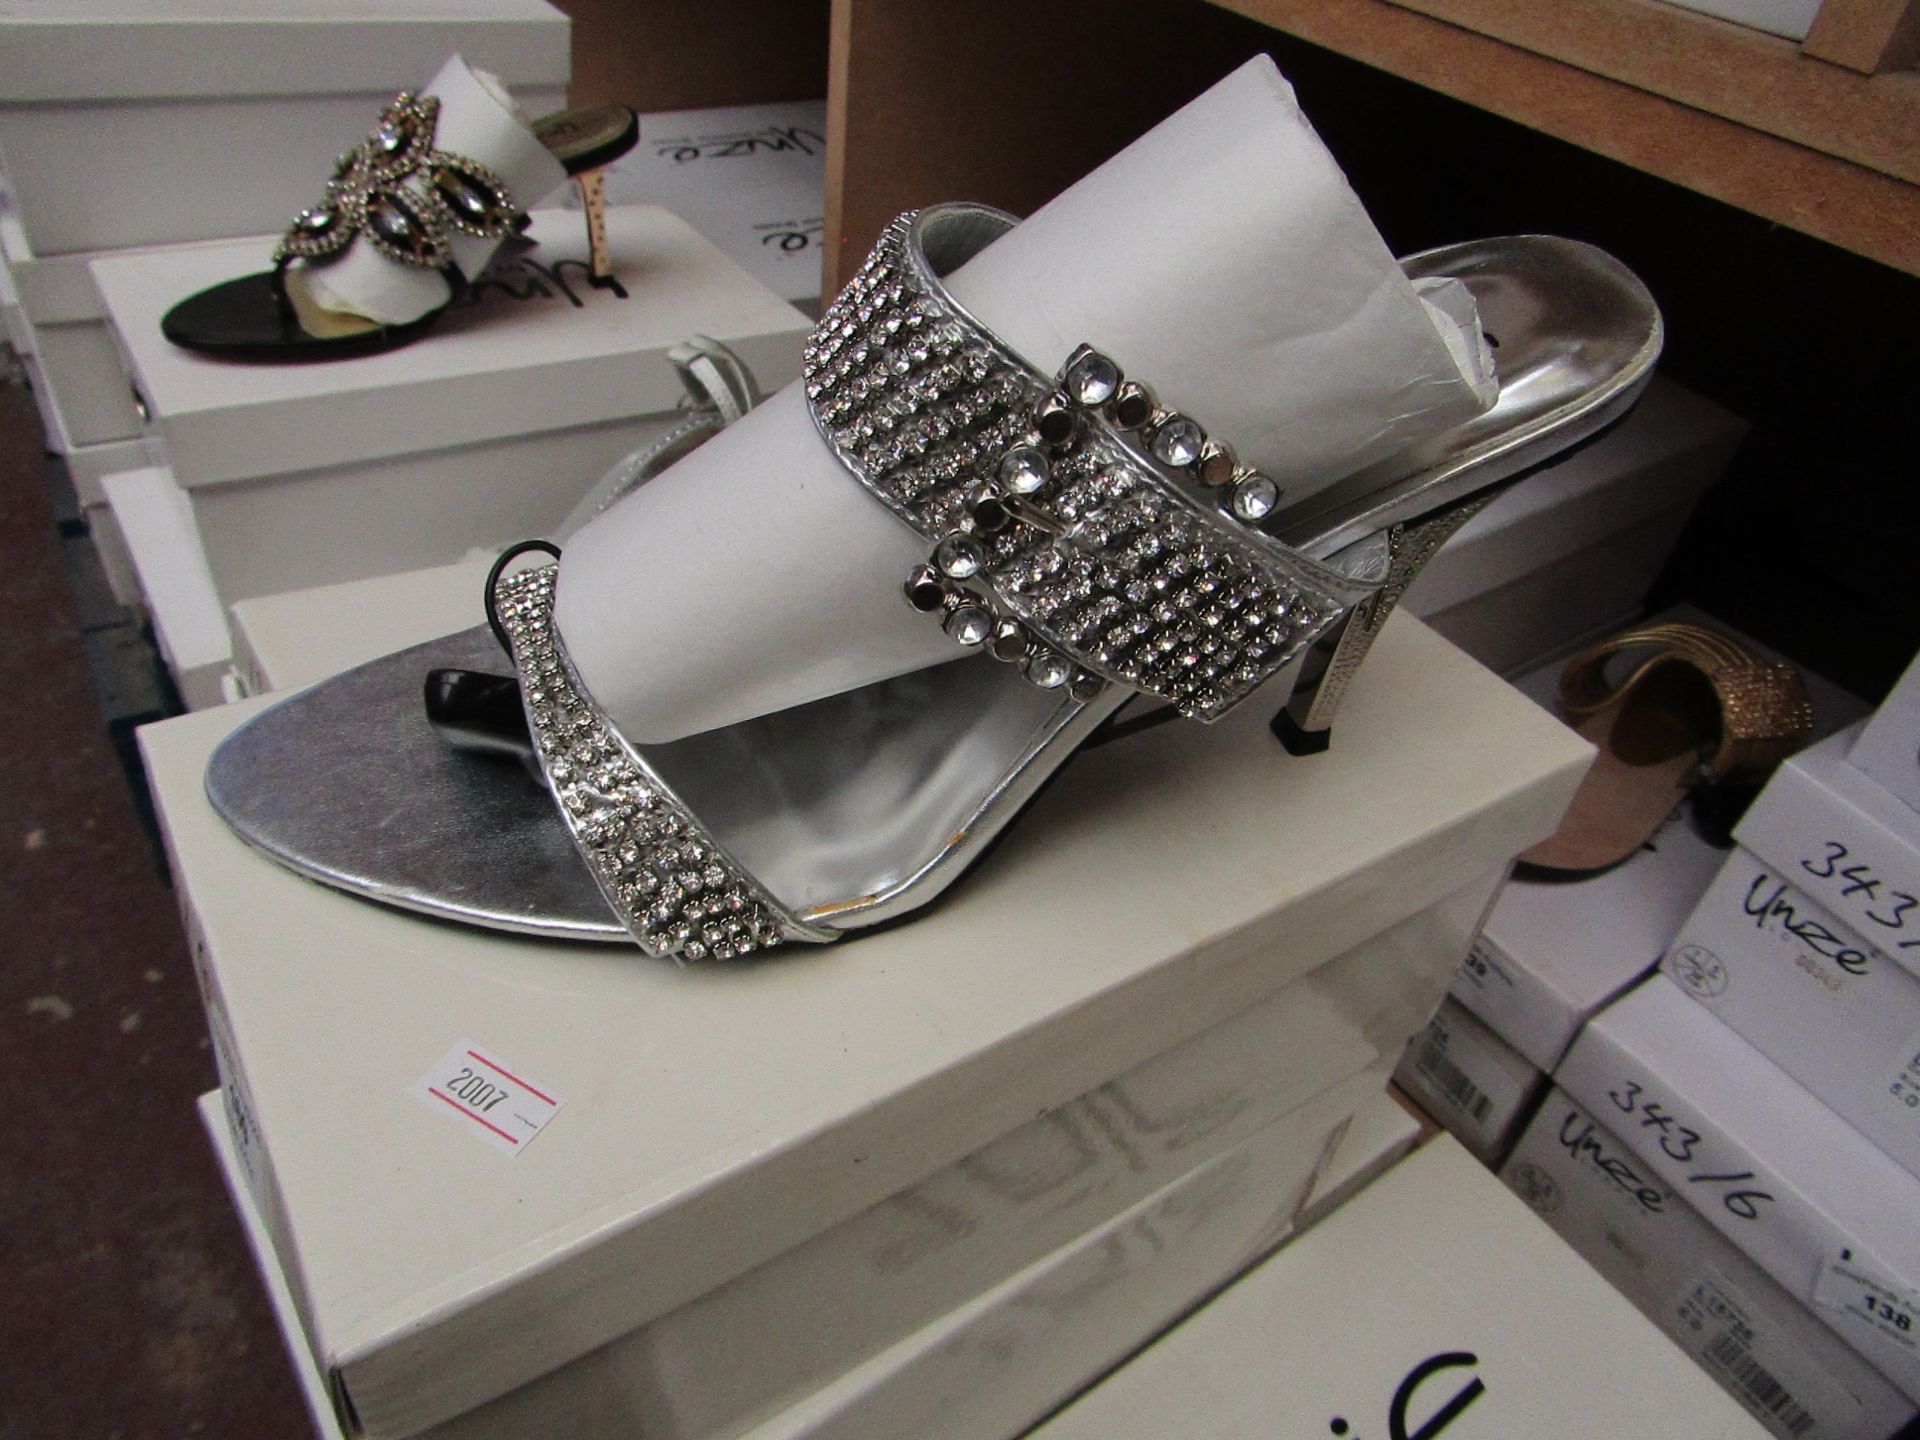 Unze by Shalamar Shoes Ladies Silver & Diamante Shoes size 4 new & boxed see image for design